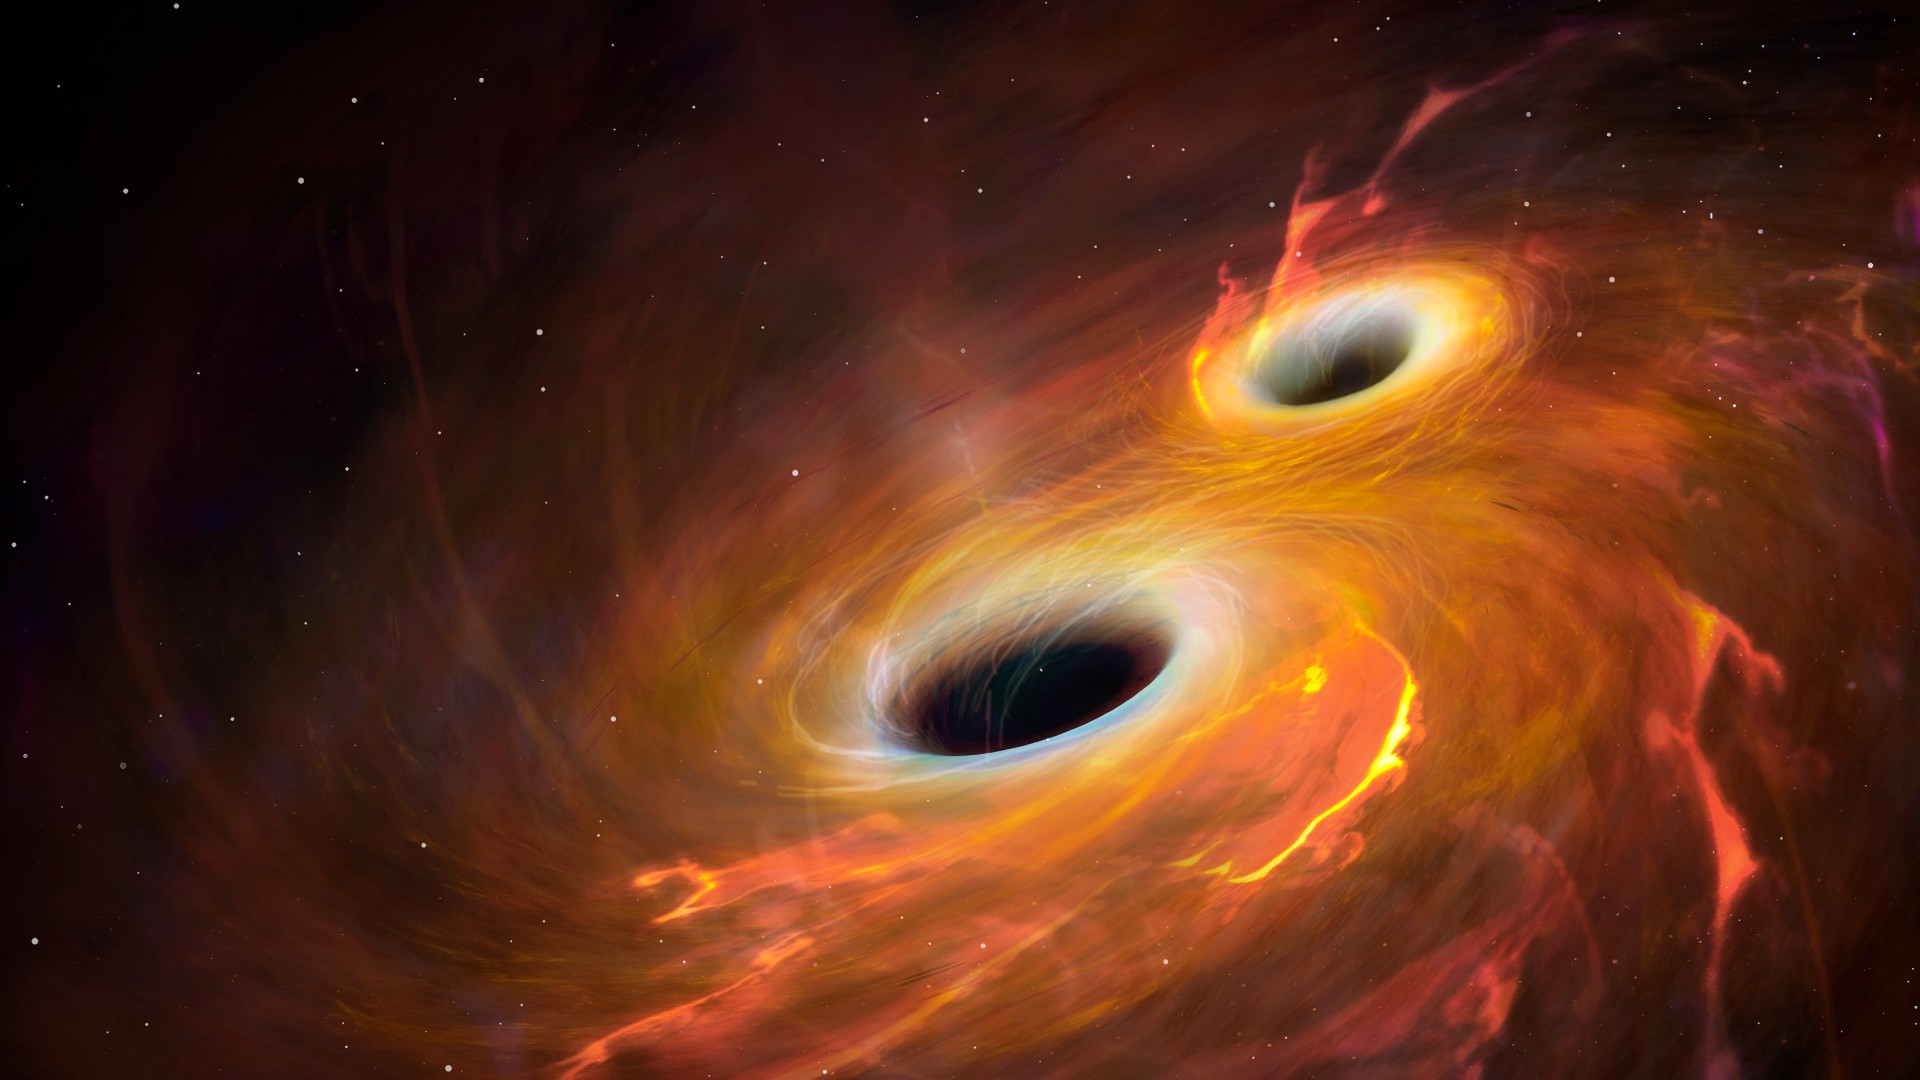 An illustration of two supermassive black holes about to collide as gravitational waves spill into space